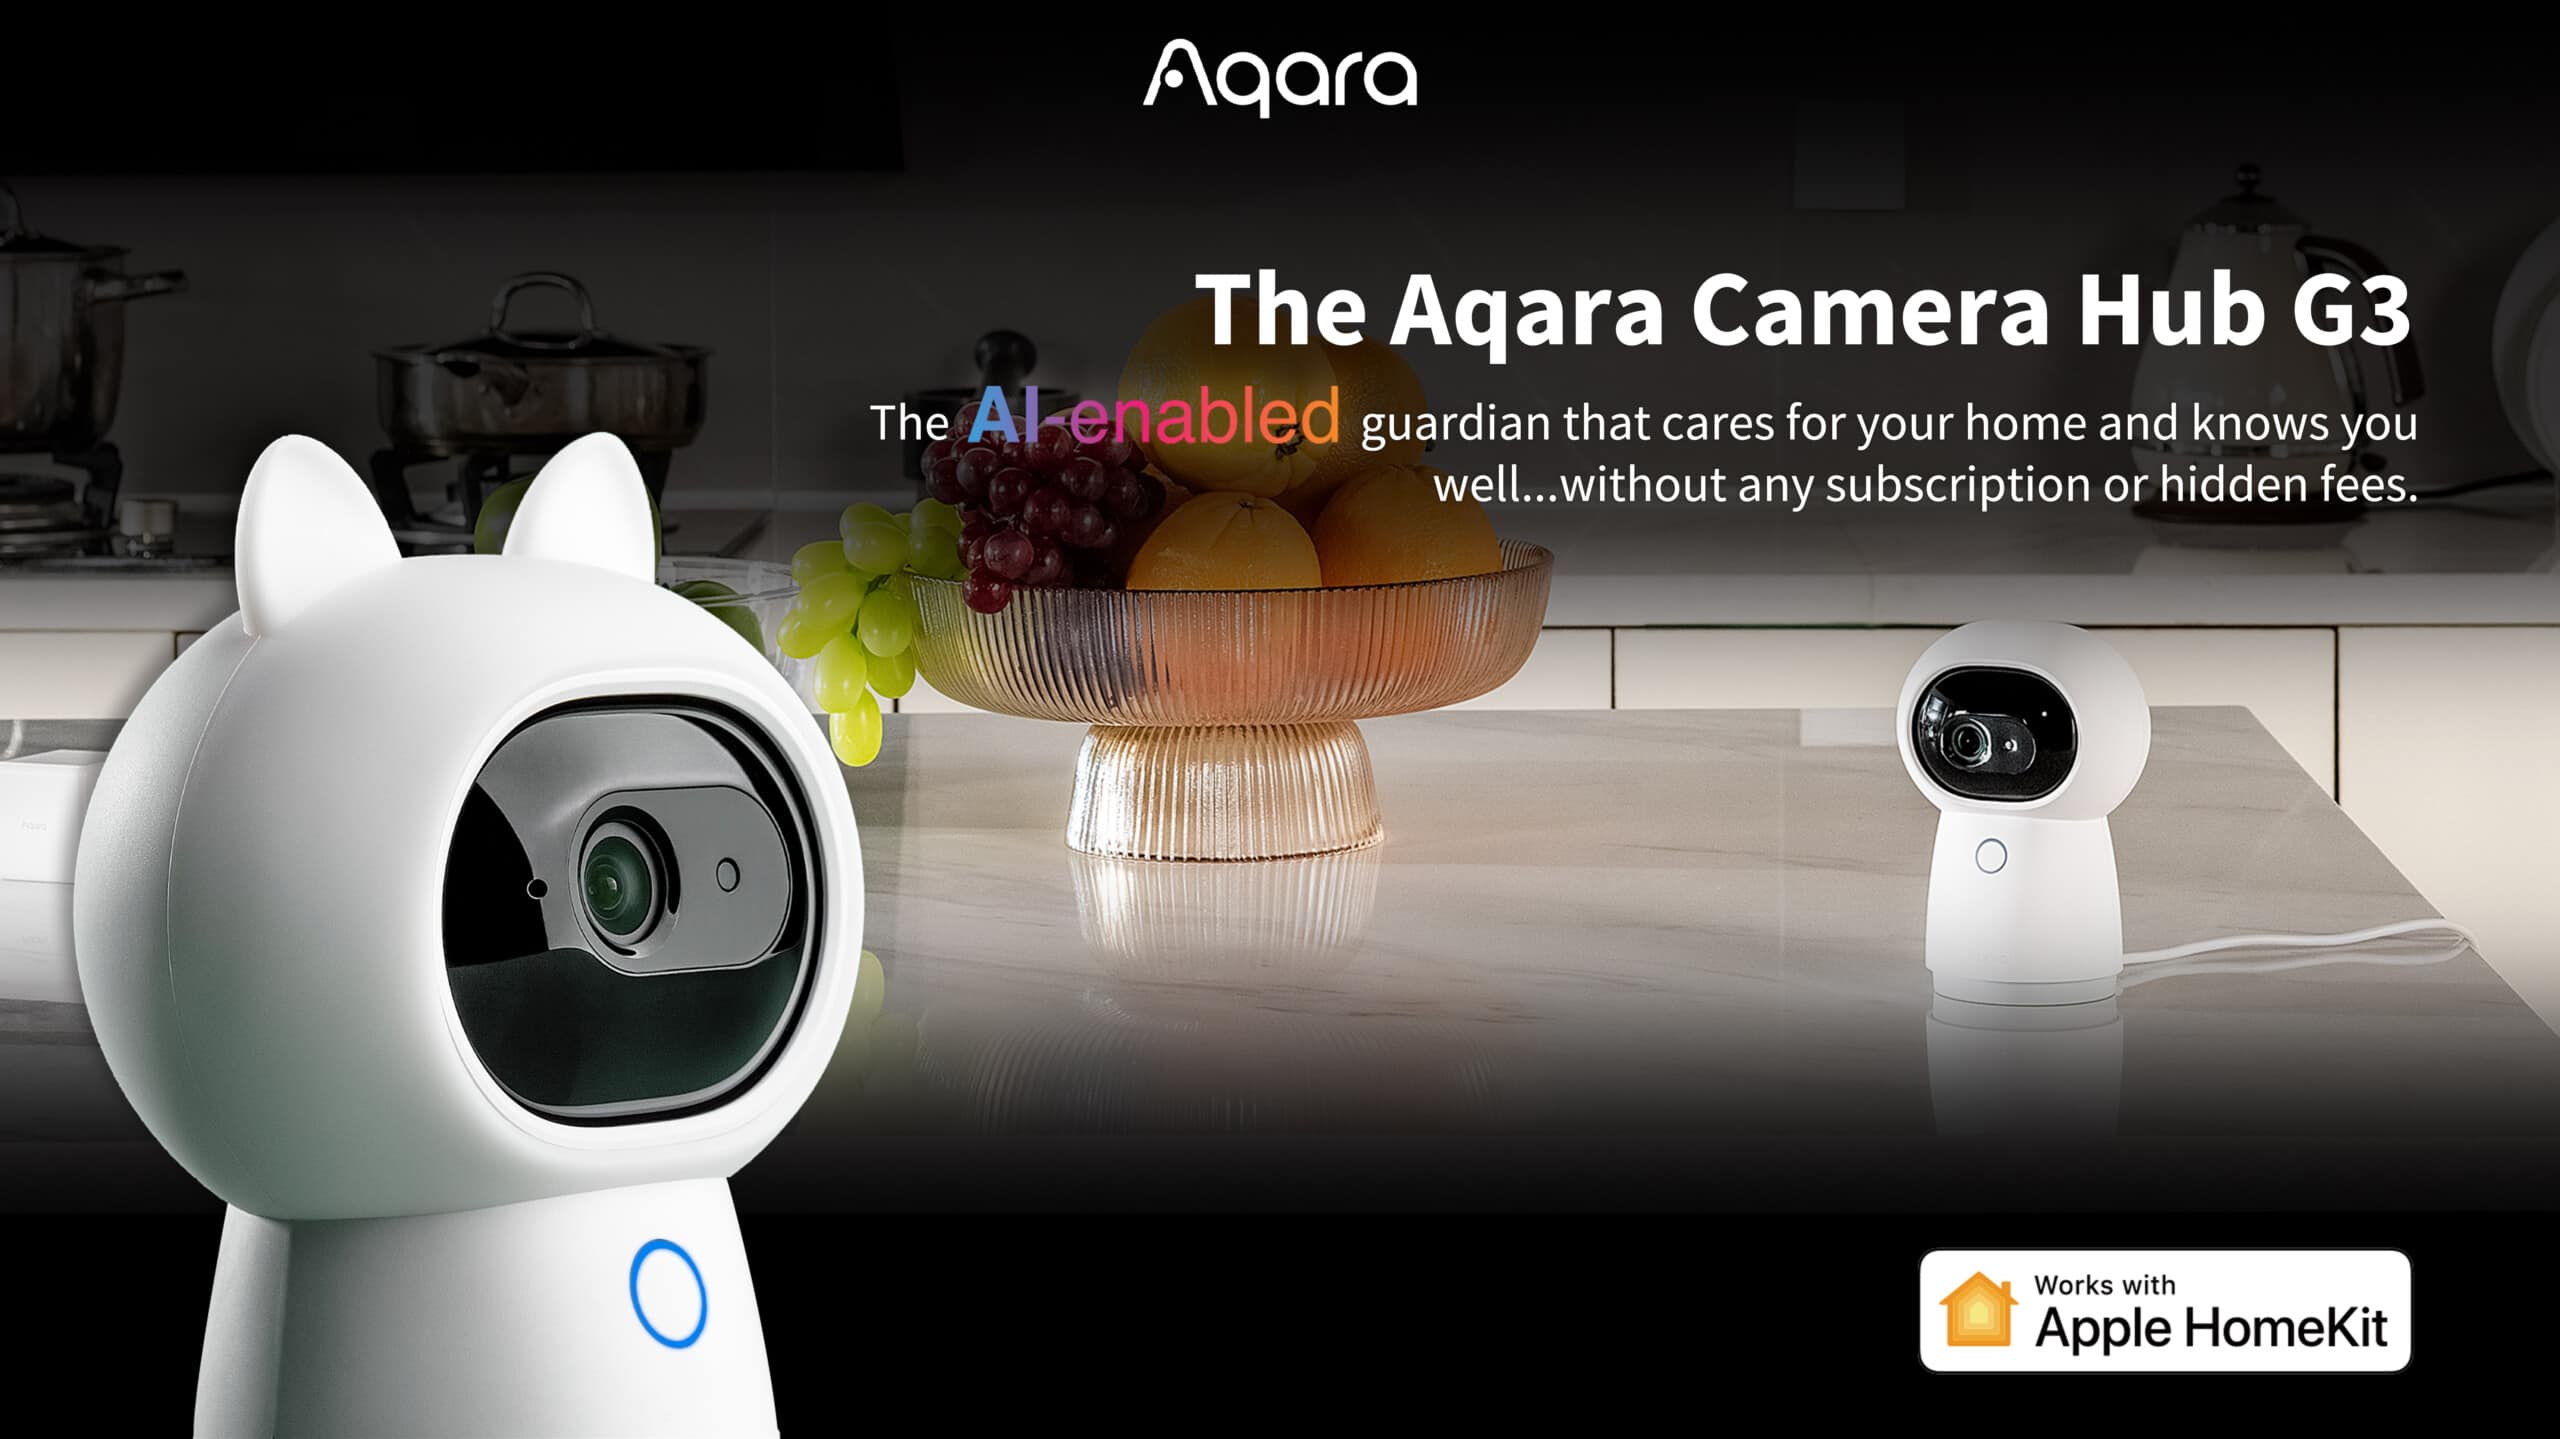 Aqara Camera Hub G3 Announced for €120/£100 with 2K, pan-and-tilt camera with the local facial and gesture recognition features